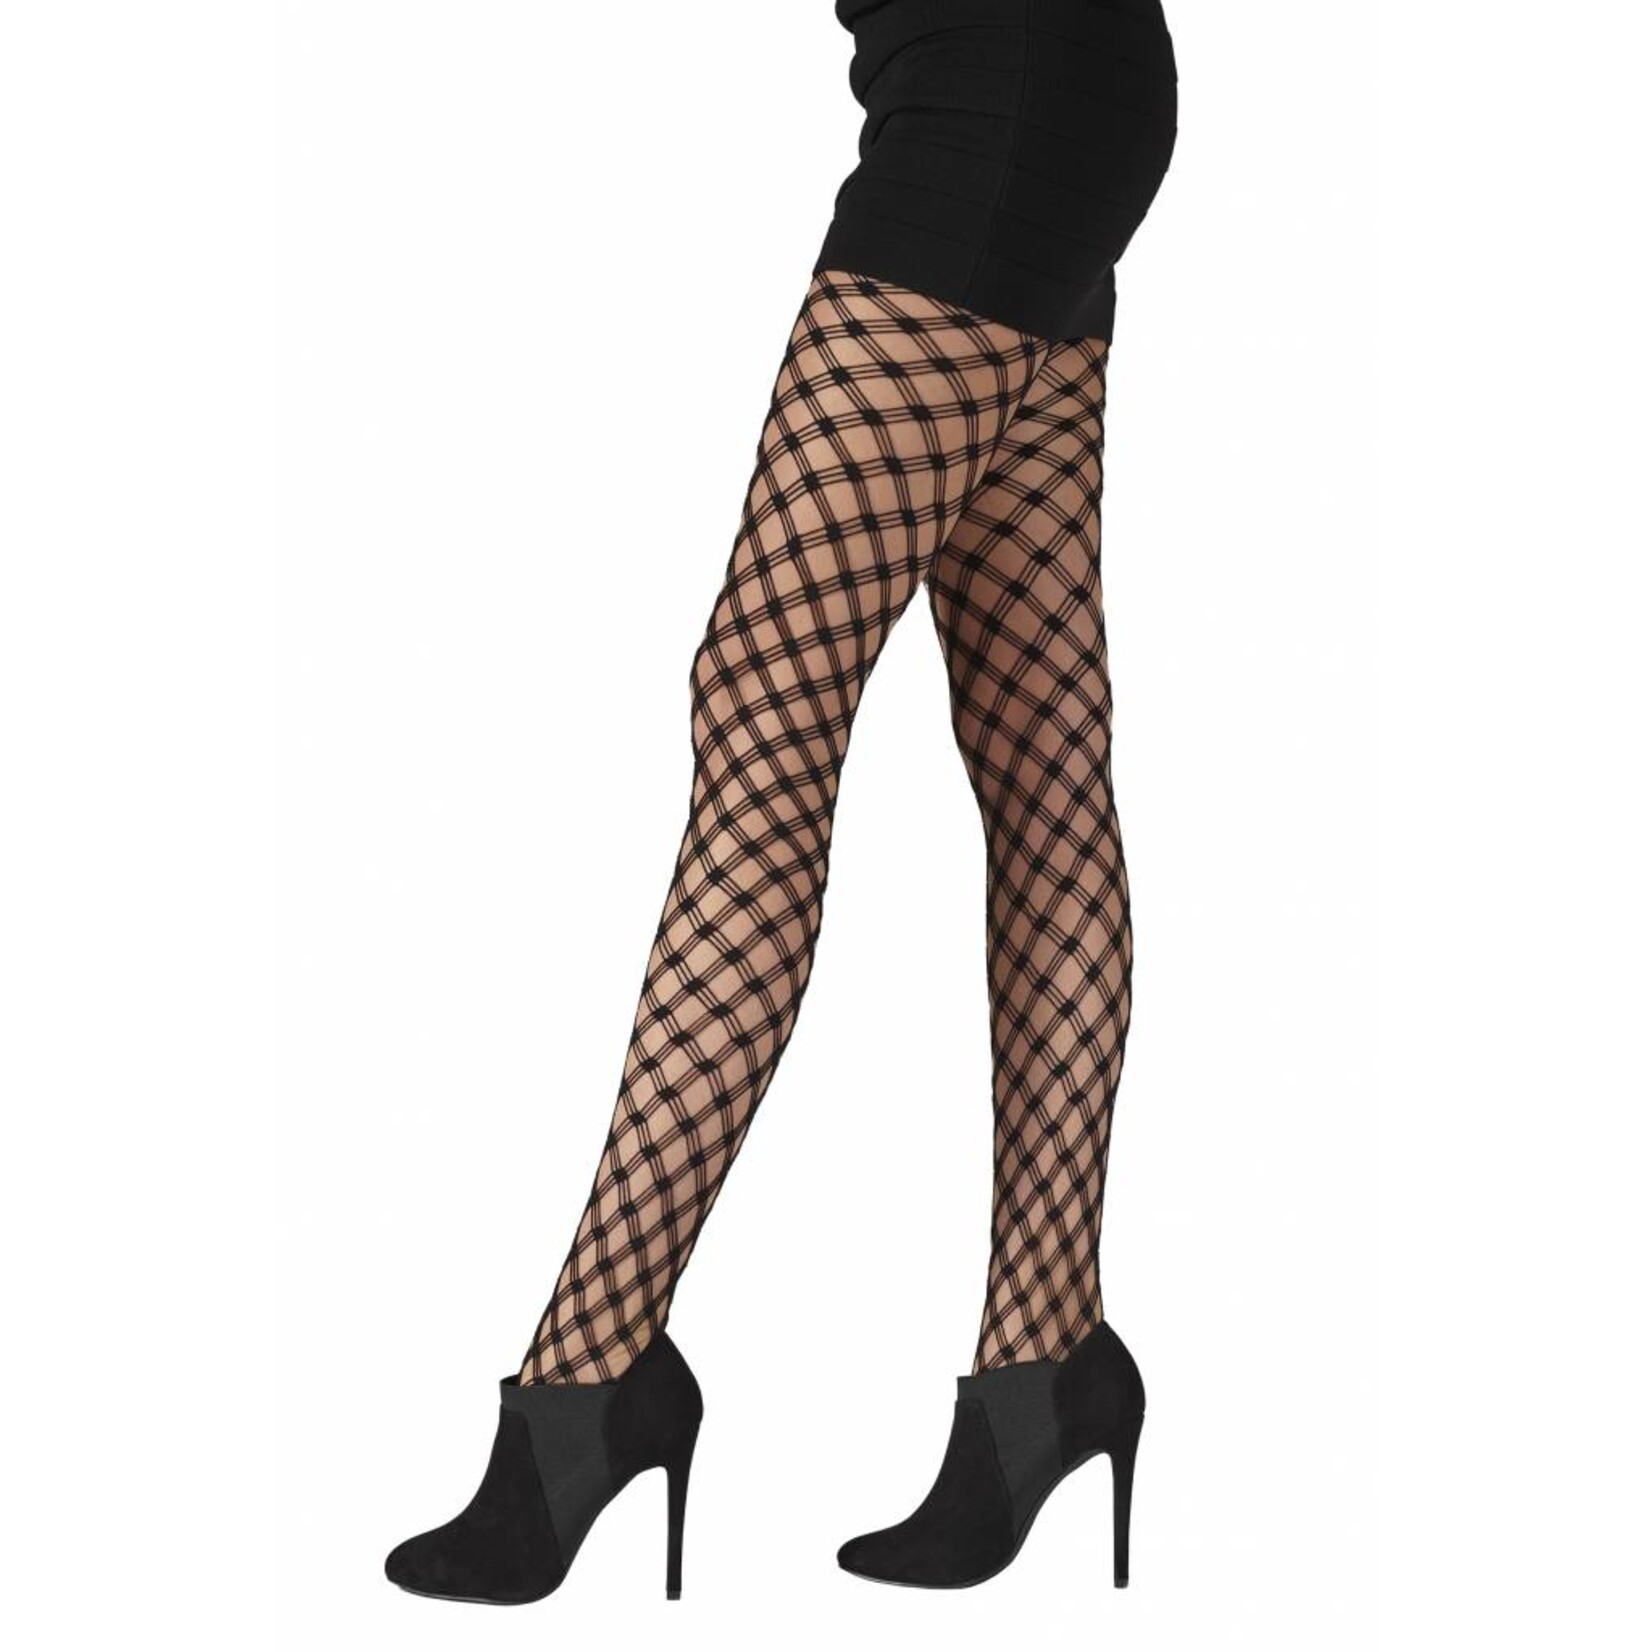 Pretty Polly  Large Criss Cross Tights